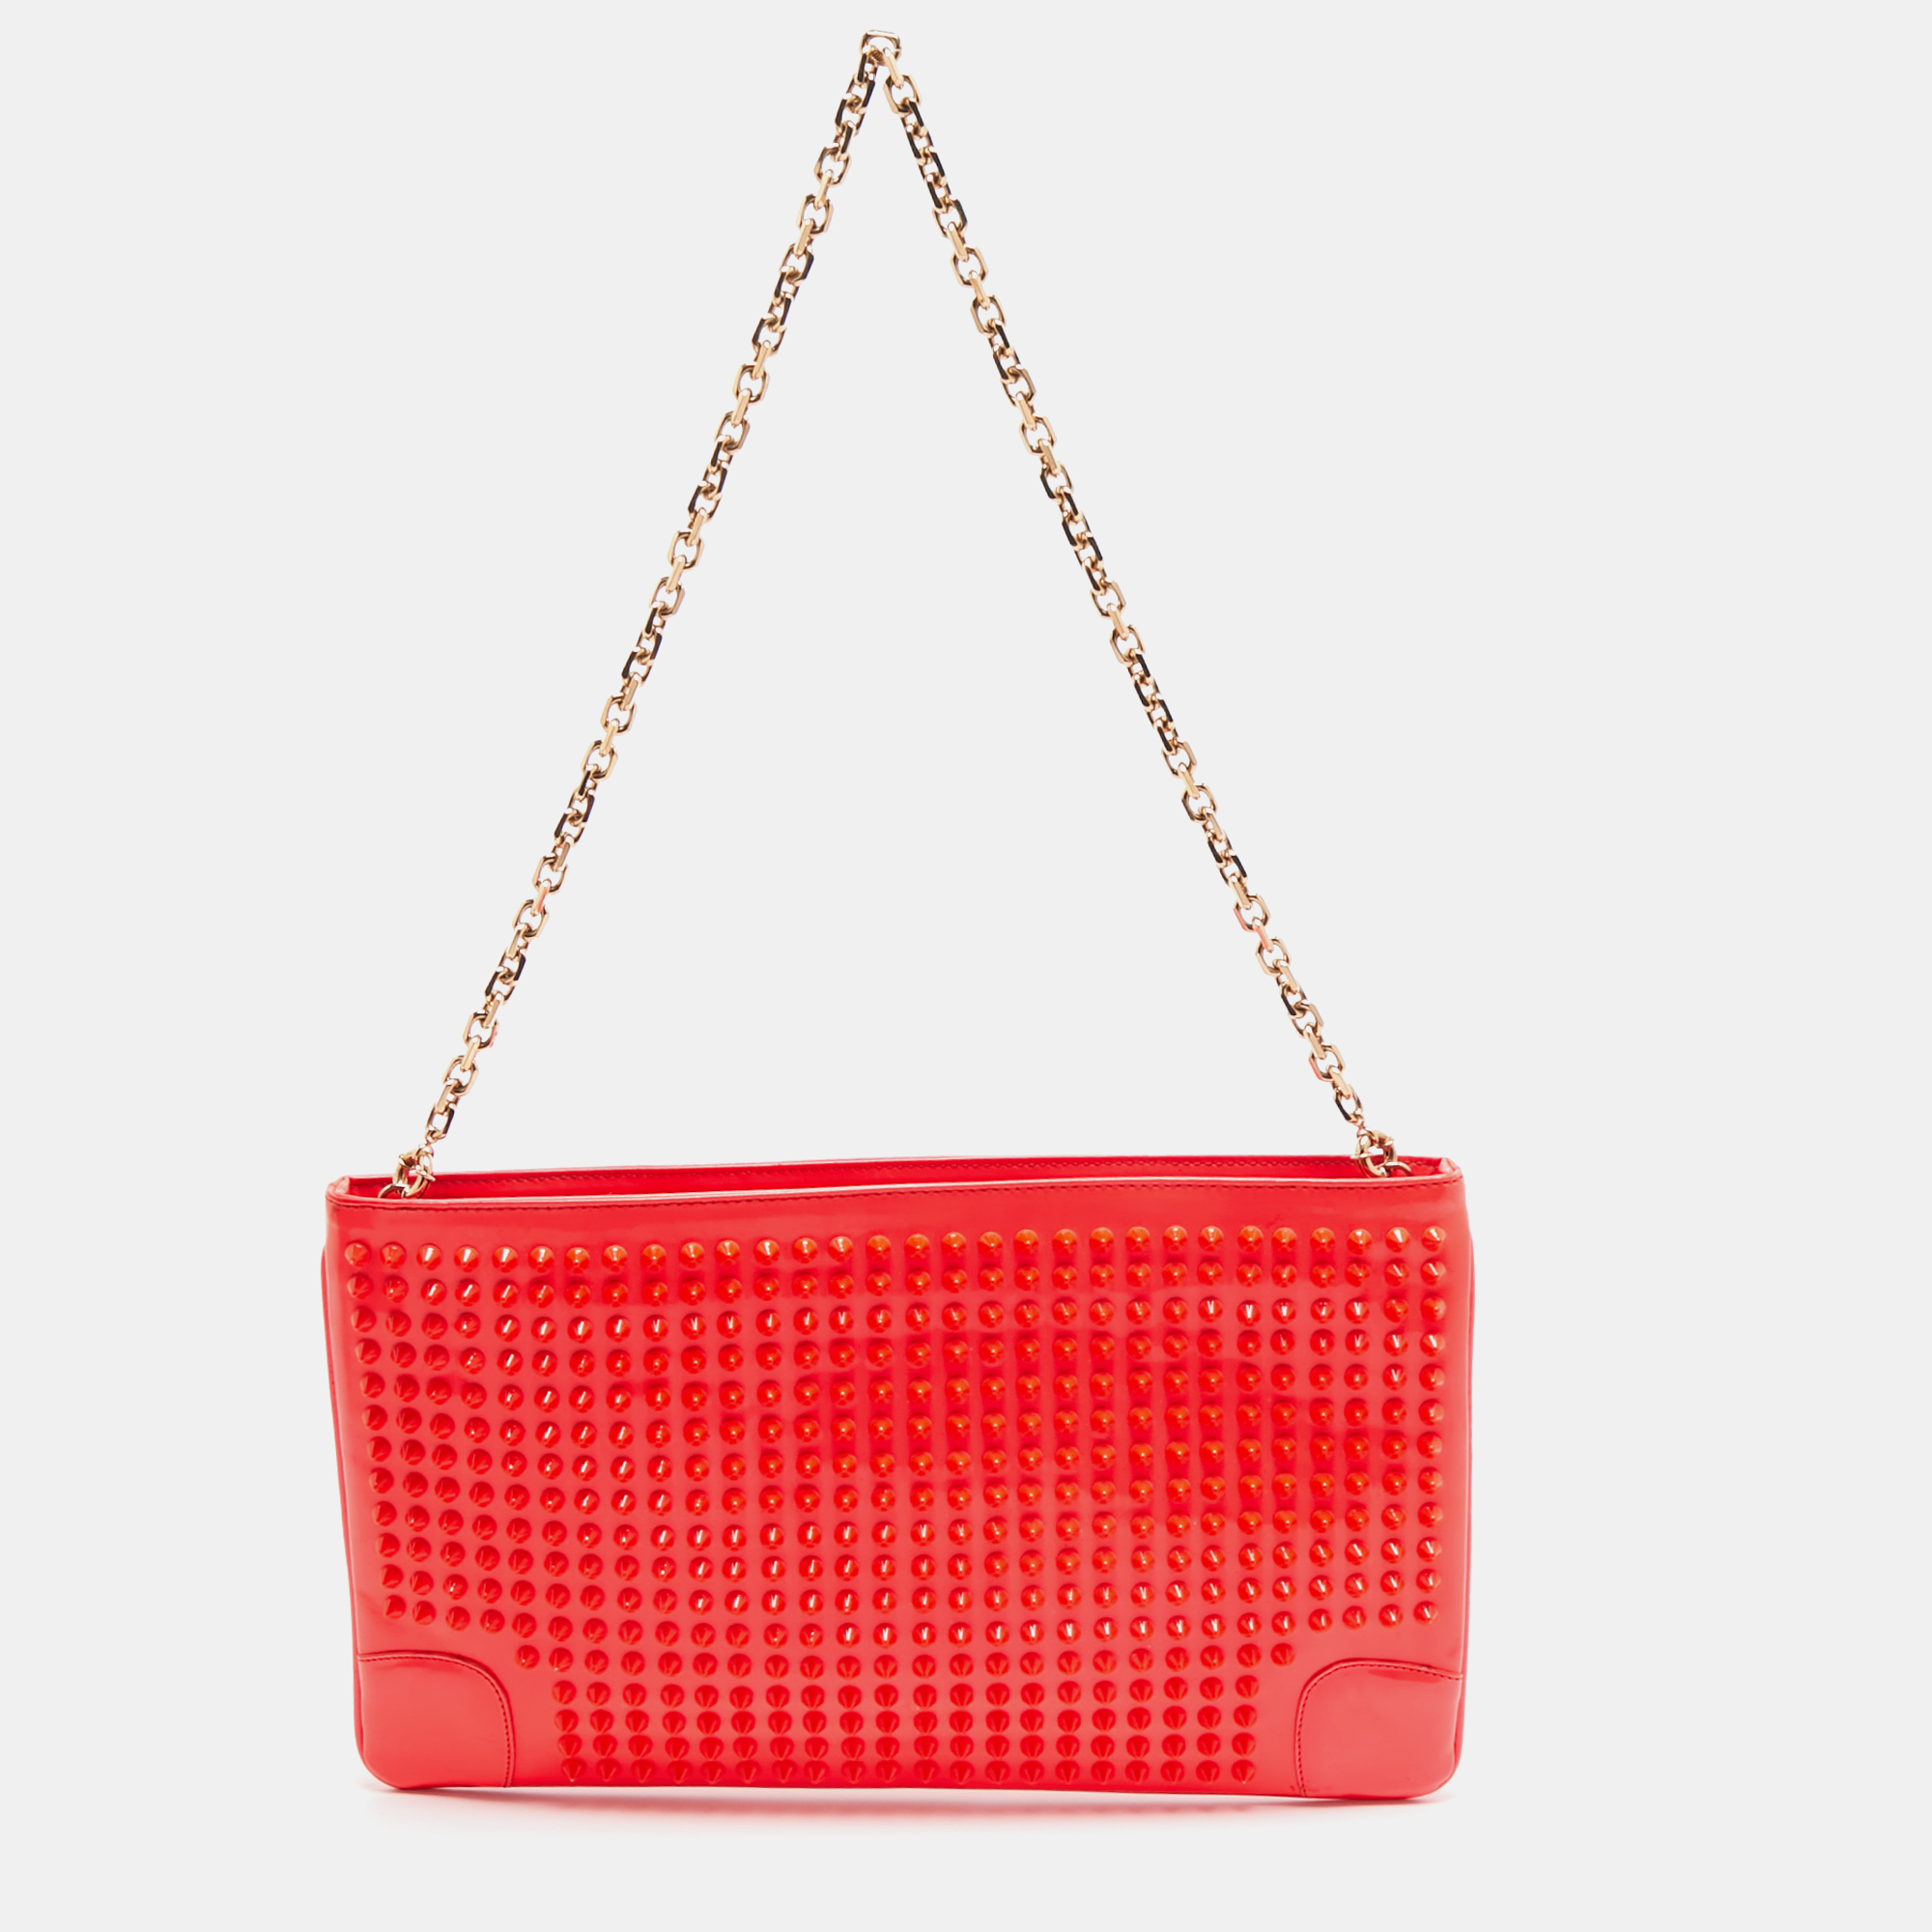 Pre-owned Christian Louboutin Neon Coral Orange Patent Leather Loubiposh Spike Chain Clutch